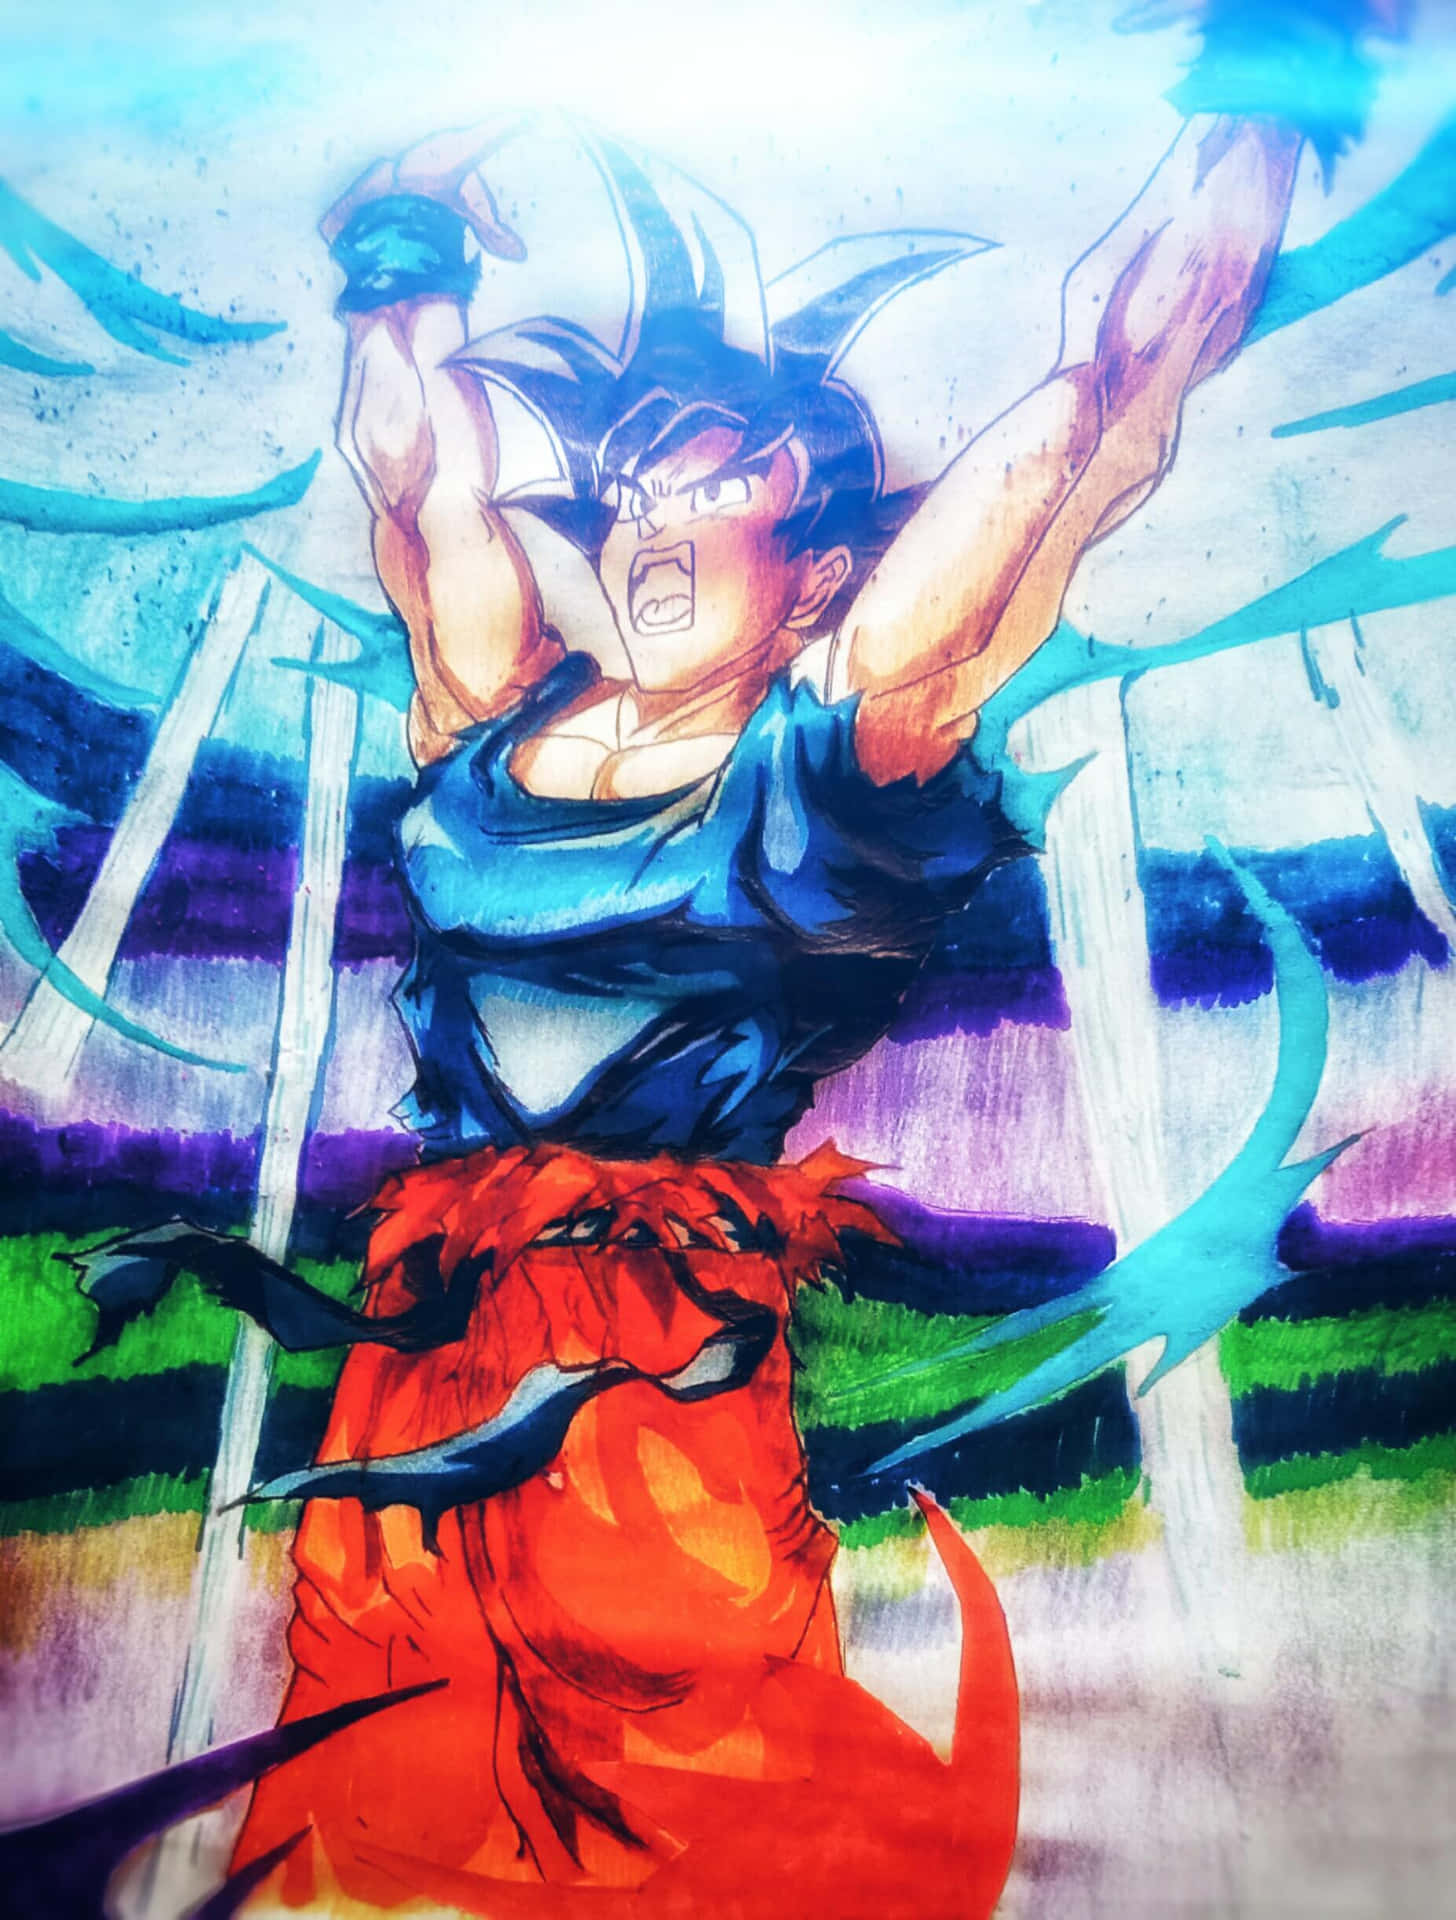 Goku's spirit sword imbued with power from the spirit bomb. Wallpaper